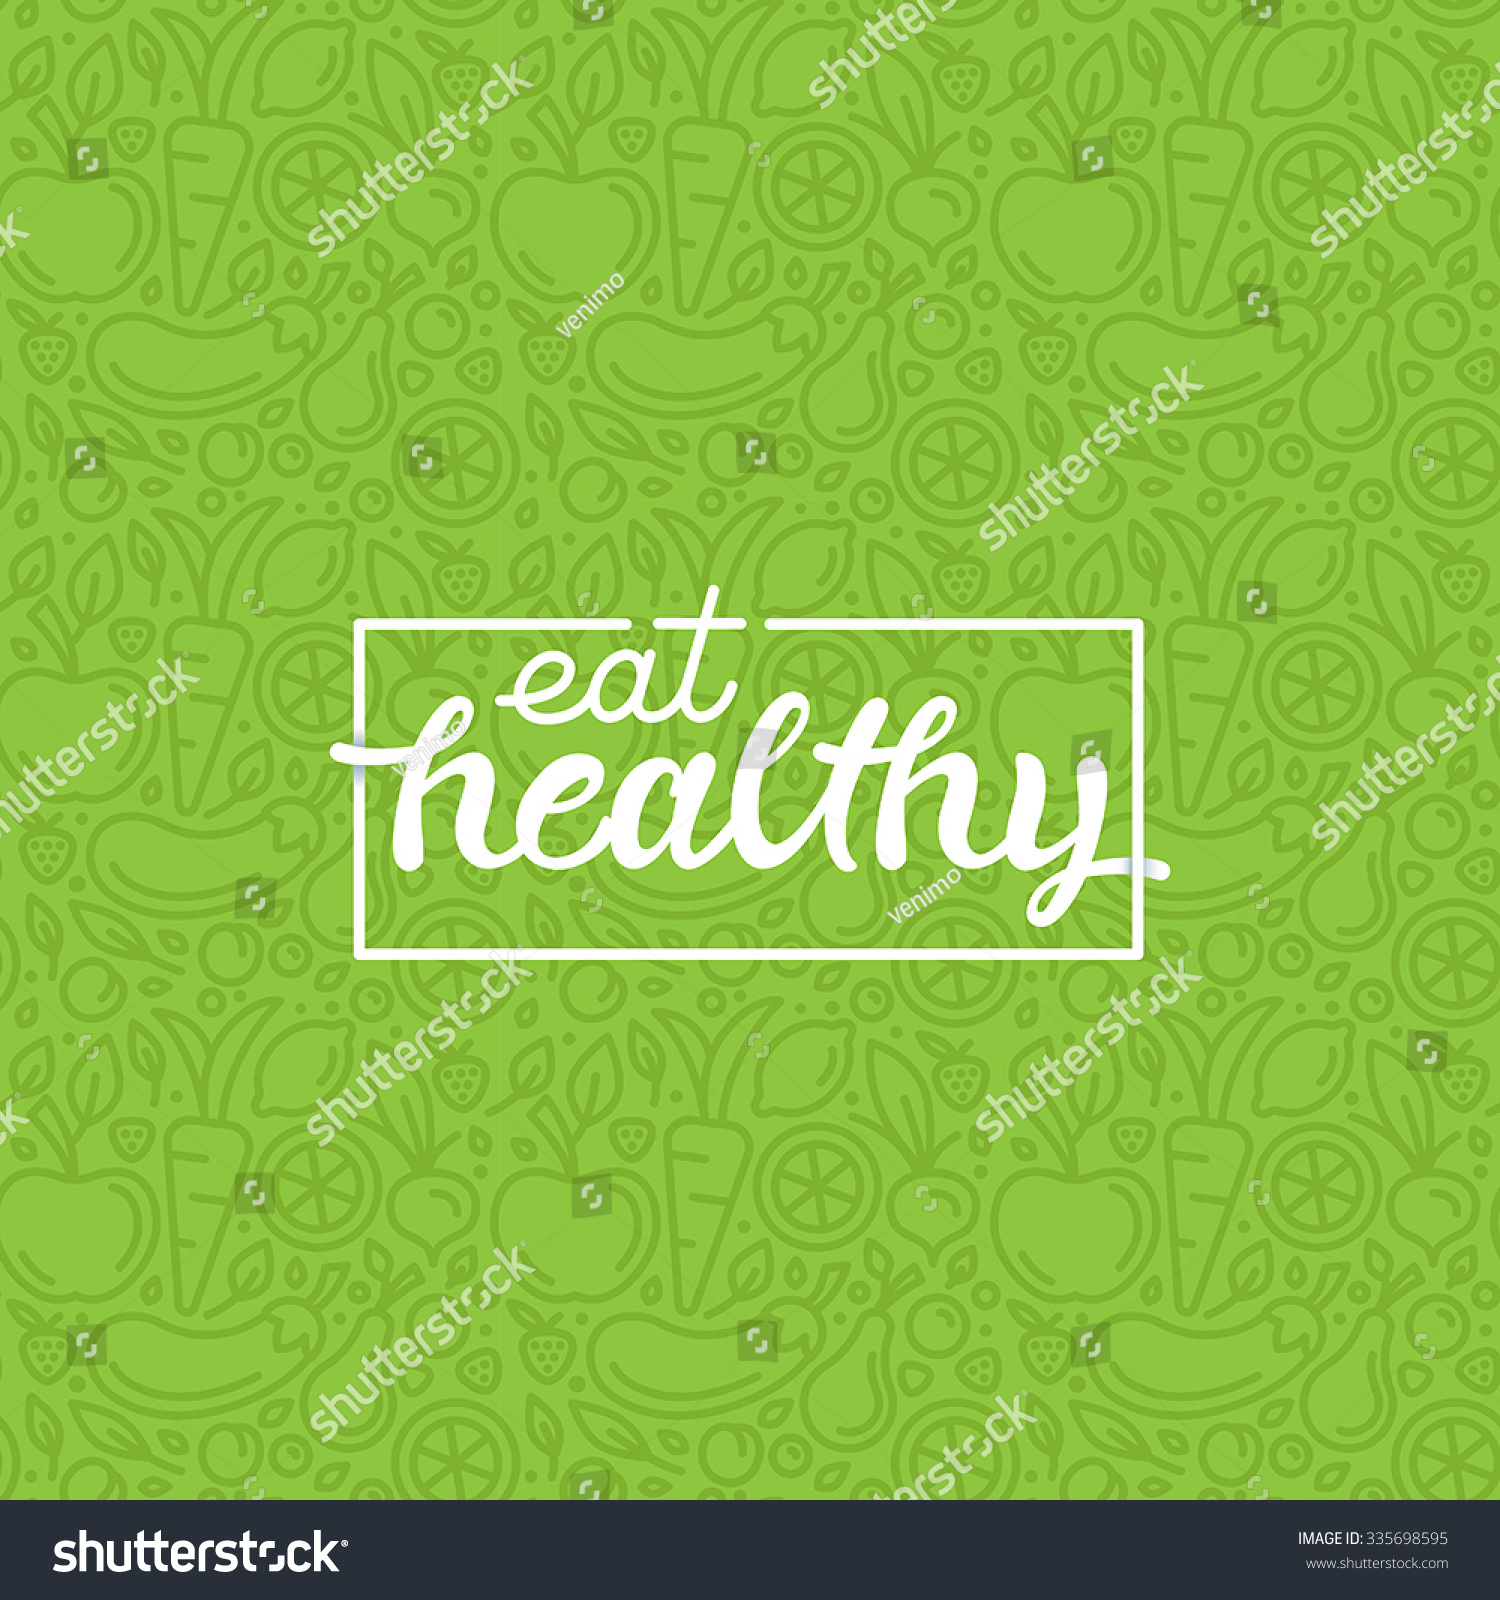 Eat healthy - motivational poster or banner with hand-lettering phrase eat healthy on green background with trendy linear icons and signs of fruits and vegetables - vector illustration #335698595